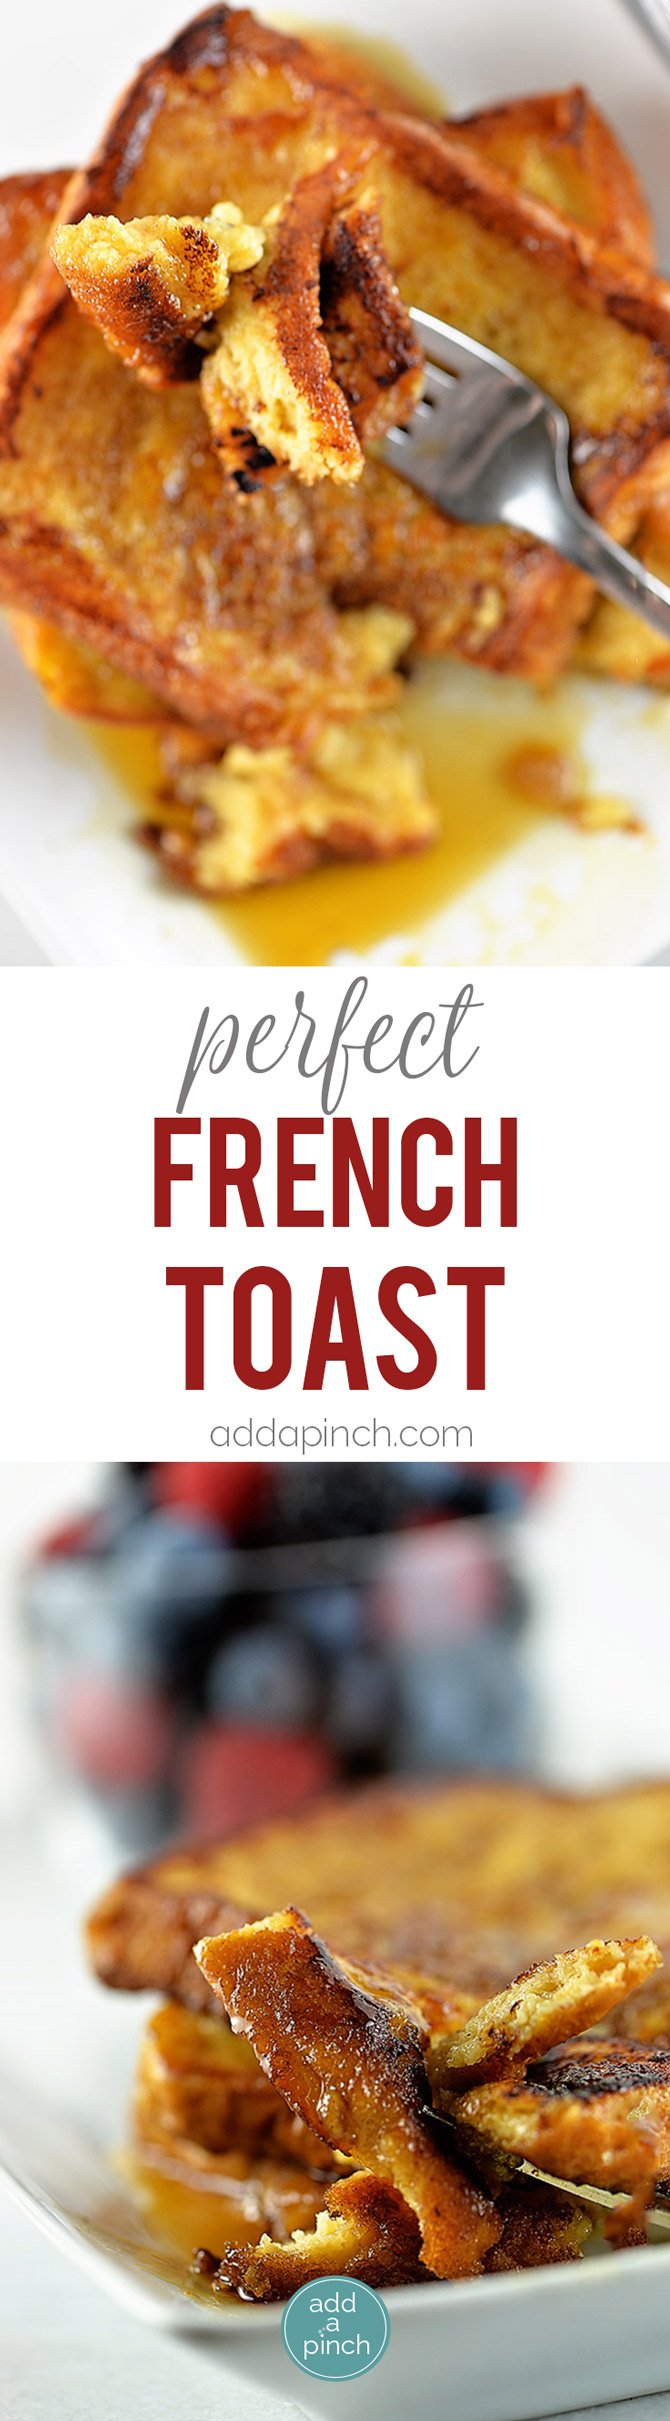 French toast collage with text.